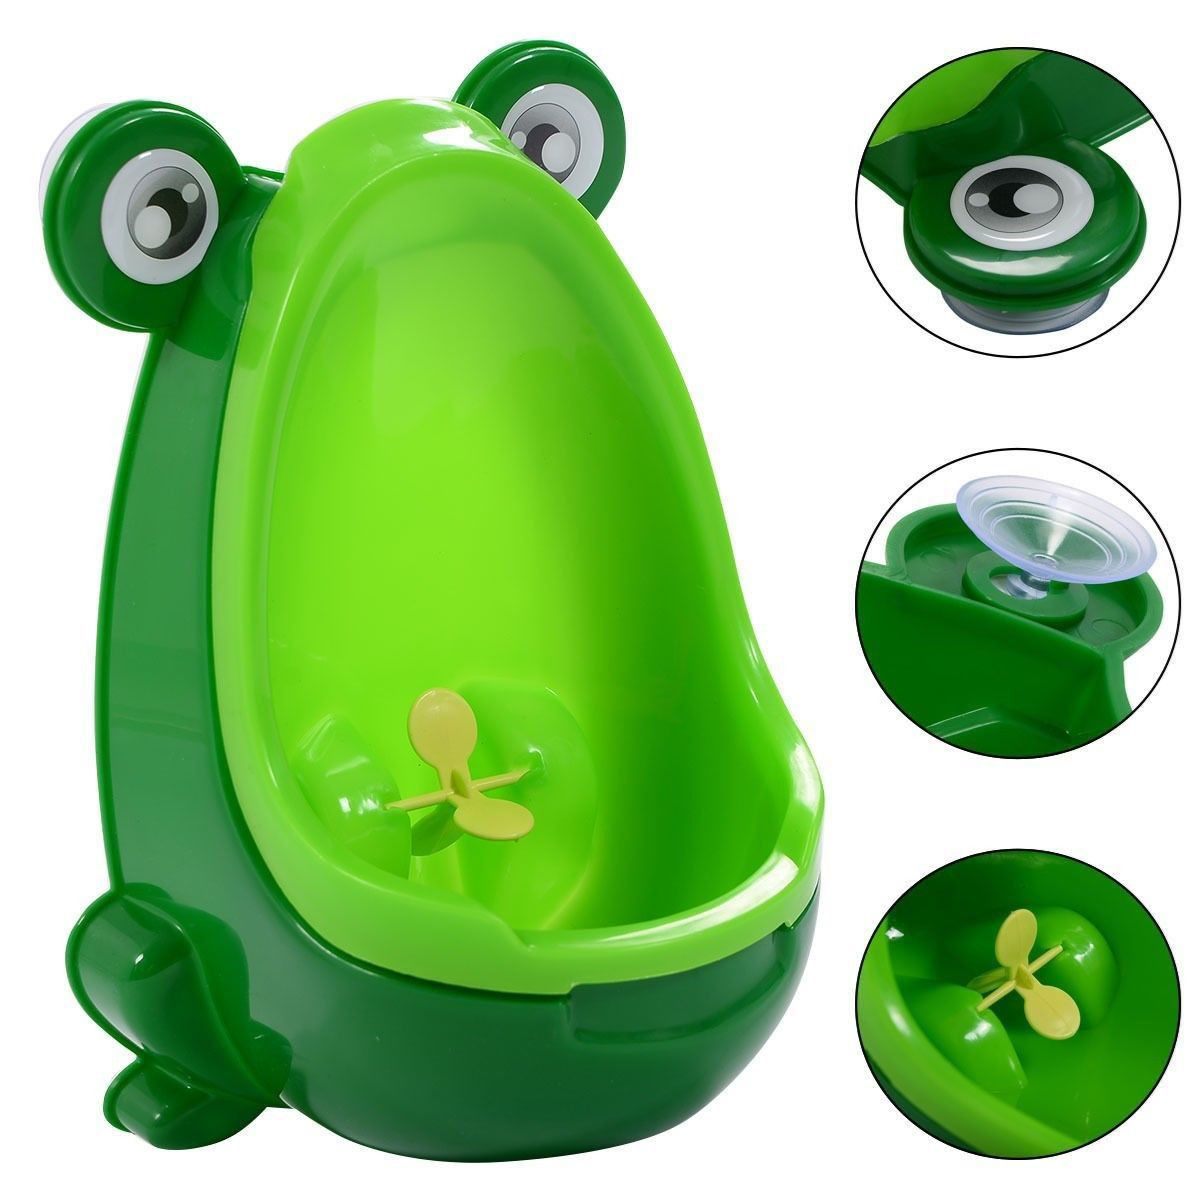 Affordable Variety / Potty Training Urinal for Baby Boys with Funny ...